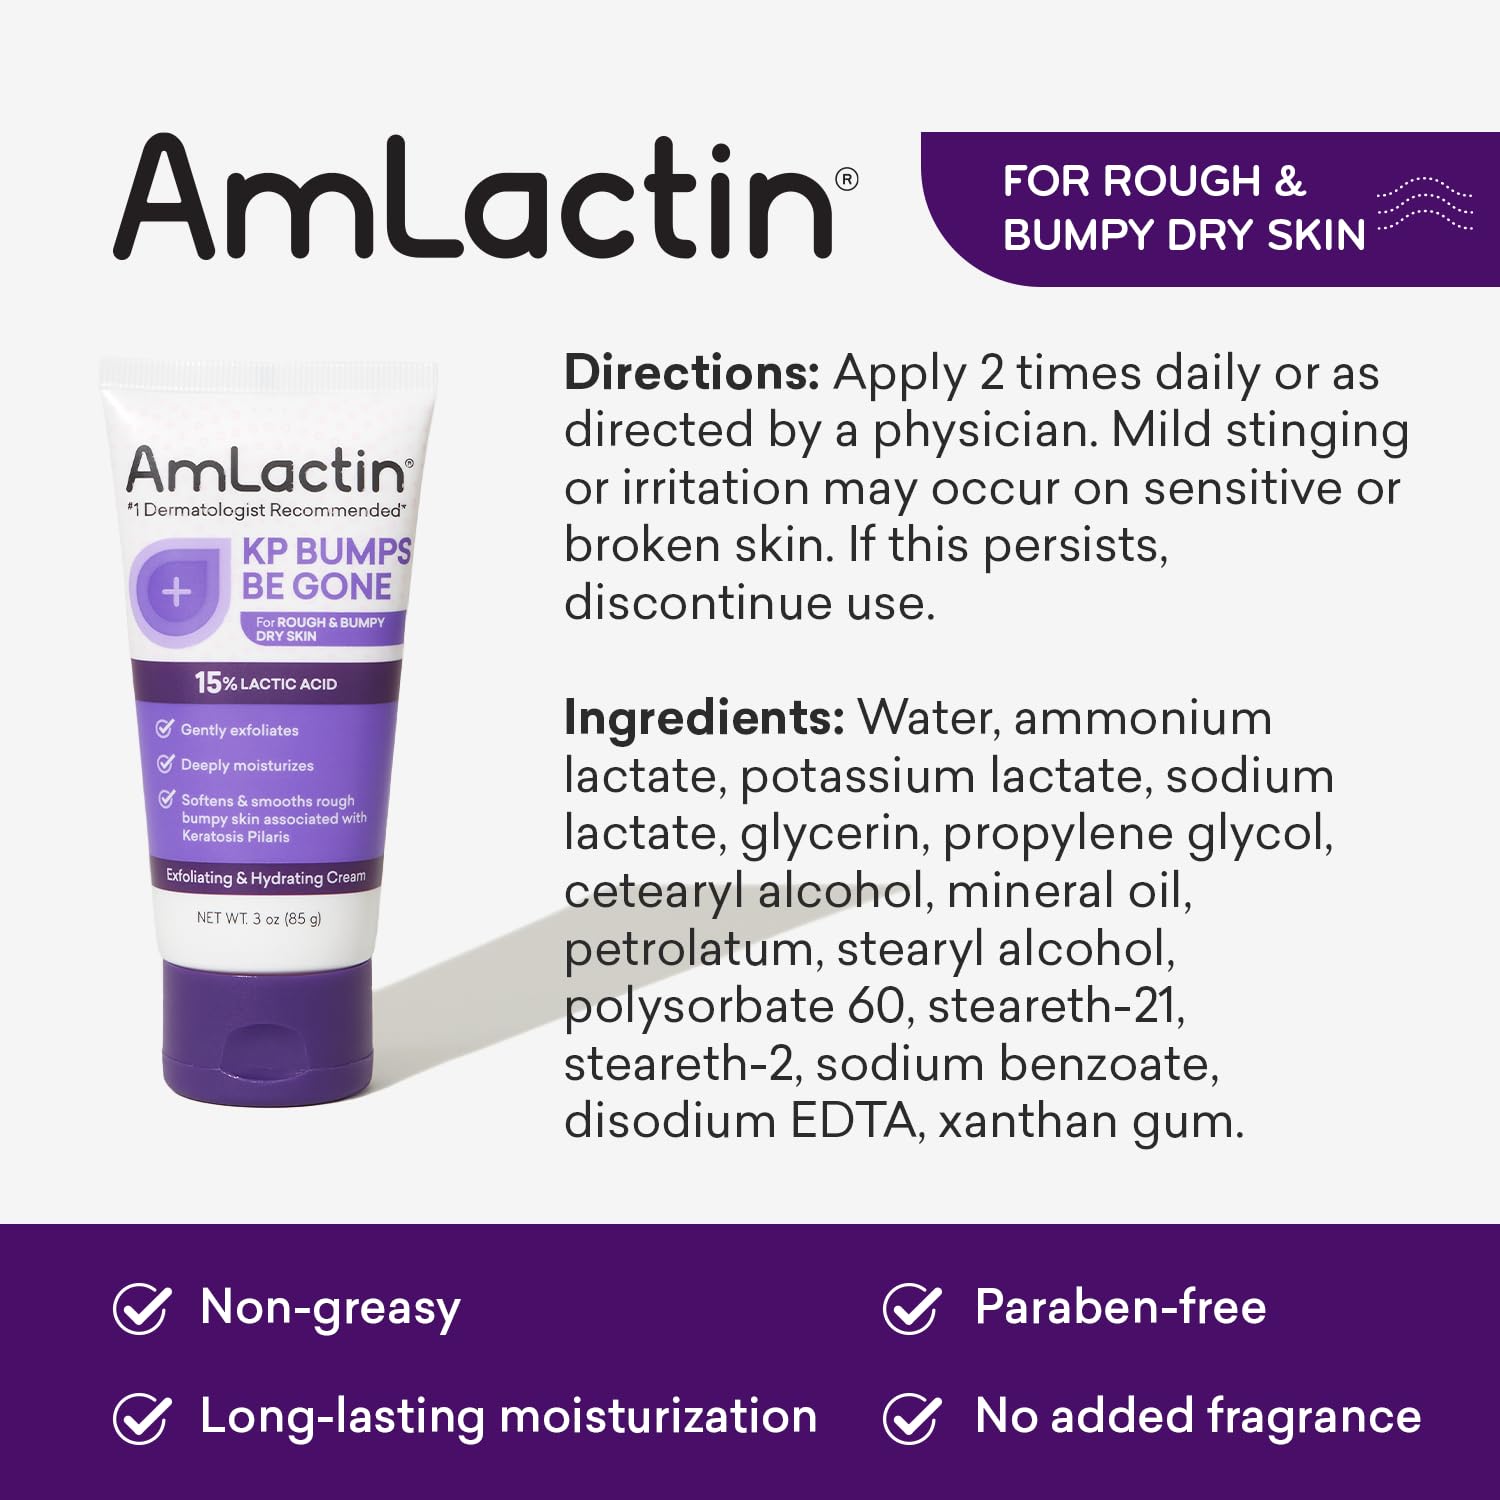 AmLactin KP Bumps Be Gone - 3 oz Keratosis Pilaris Moisturizing Cream with 15% Lactic Acid - Exfoliator and Moisturizer for Dry, Rough and Bumpy Skin (Packaging May Vary) : Beauty & Personal Care